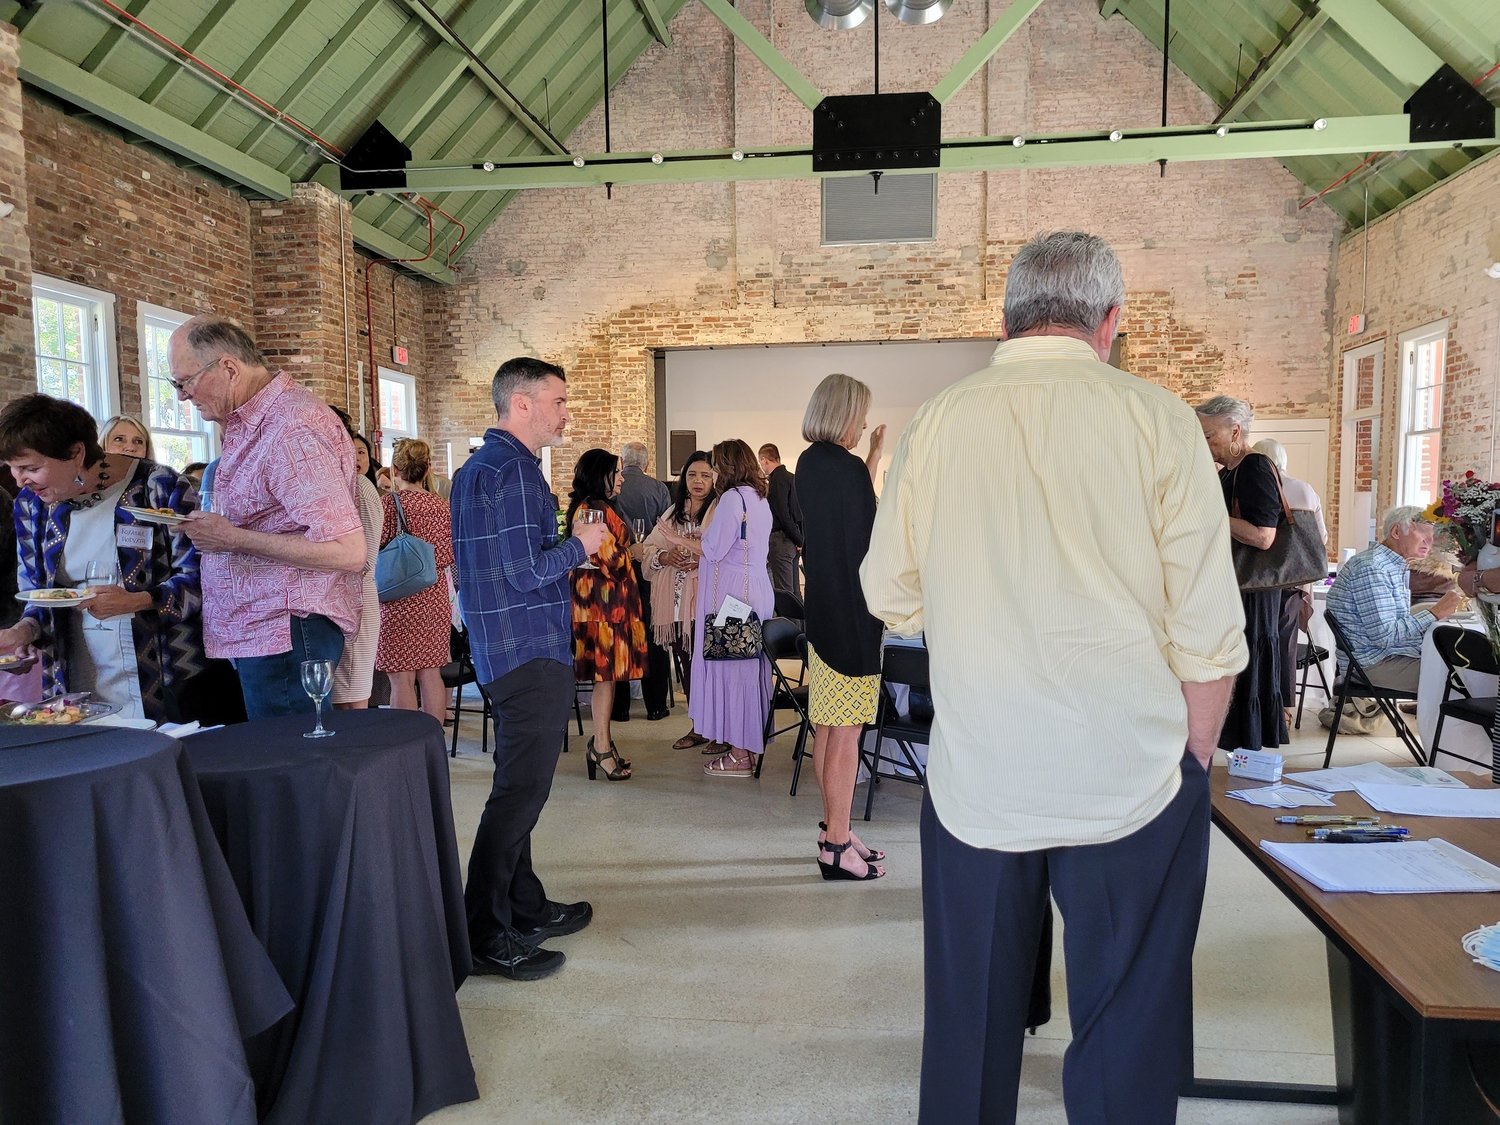 St. Johns Cultural Council ROWITA awards event recipients and attendees gather at The Waterworks.